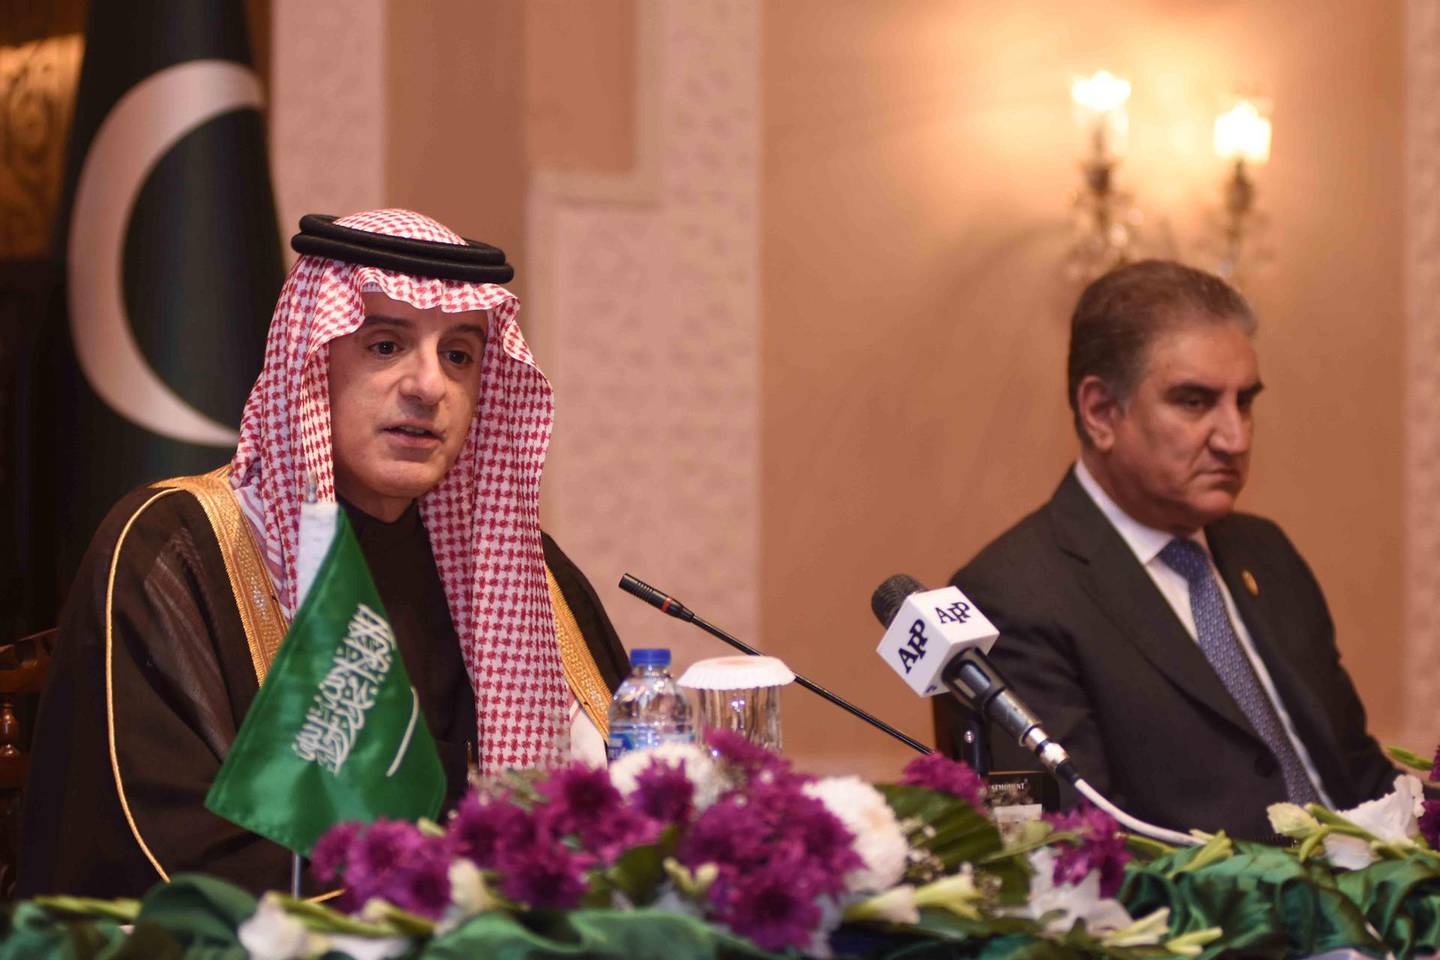 epa07378828 A handout photo made available by Press Information Department shows Saudi Minister of State for Foreign Affairs Adel Al-Jubeir (L) and Pakistani Minister of Foreign Affairs
Shah Mehmood Qureshi during a meeting in Islamabad, Pakistan, 18 February 2019. Pakistan on 18 February conferred its highest civilian award, Nishan-e-Pakistan, to the crown prince of Saudi Arabia where he announced multi-billion-dollar investments to help the kingdom's traditional ally tide over financial crisis amid declining foreign exchange reserves.  EPA/PRESS INFORMATION DEPARTMENT HANDOUT  HANDOUT EDITORIAL USE ONLY/NO SALES